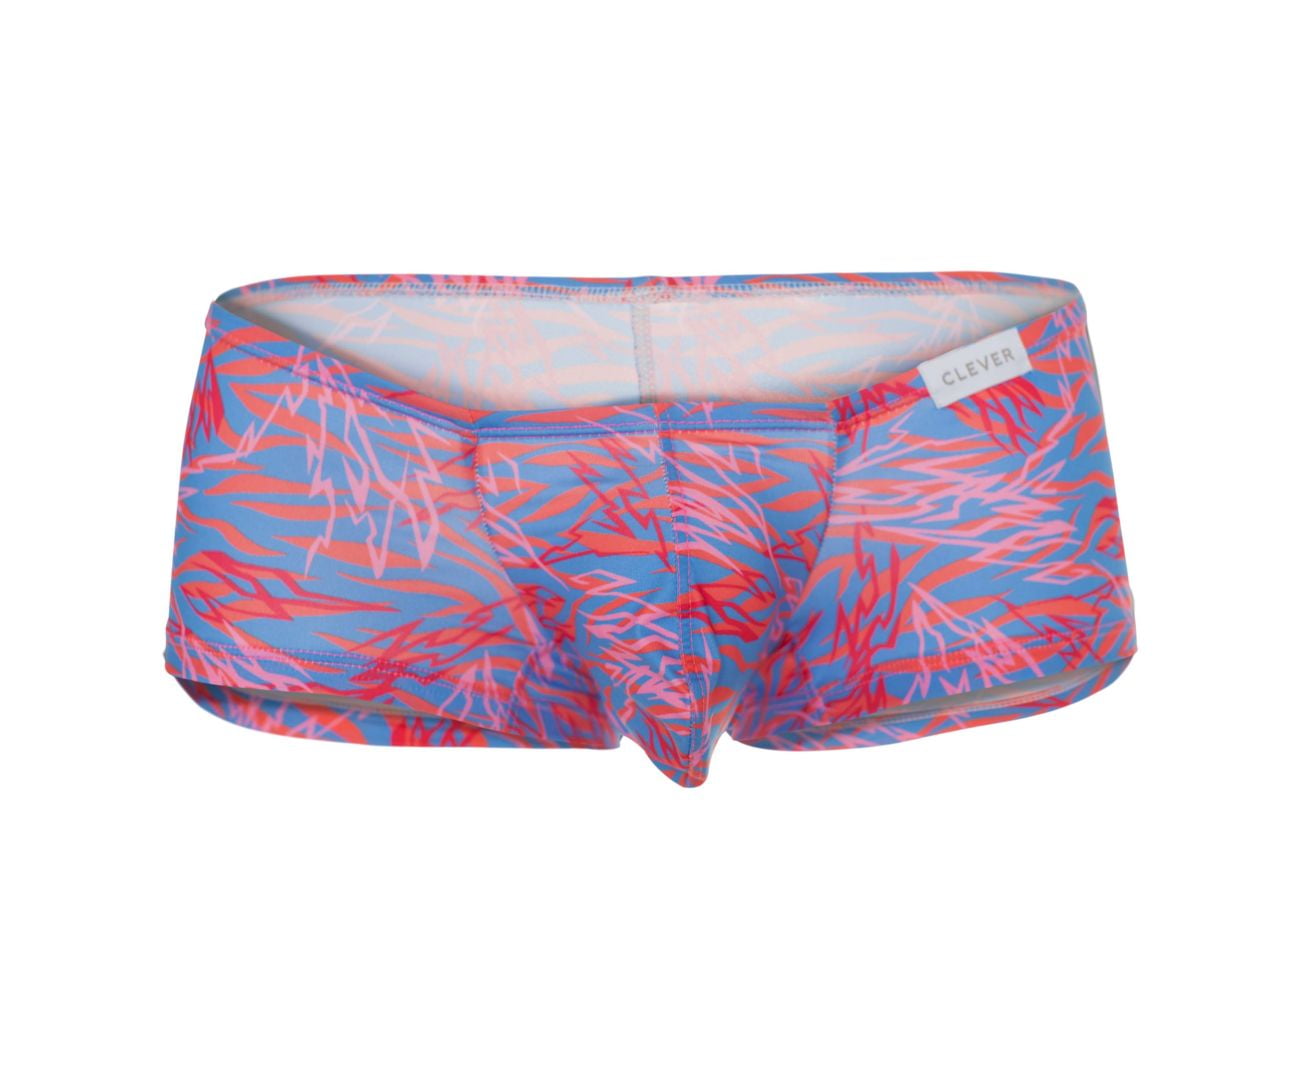 Clever 1041 Zug Trunks Color Fuchsia Size L 